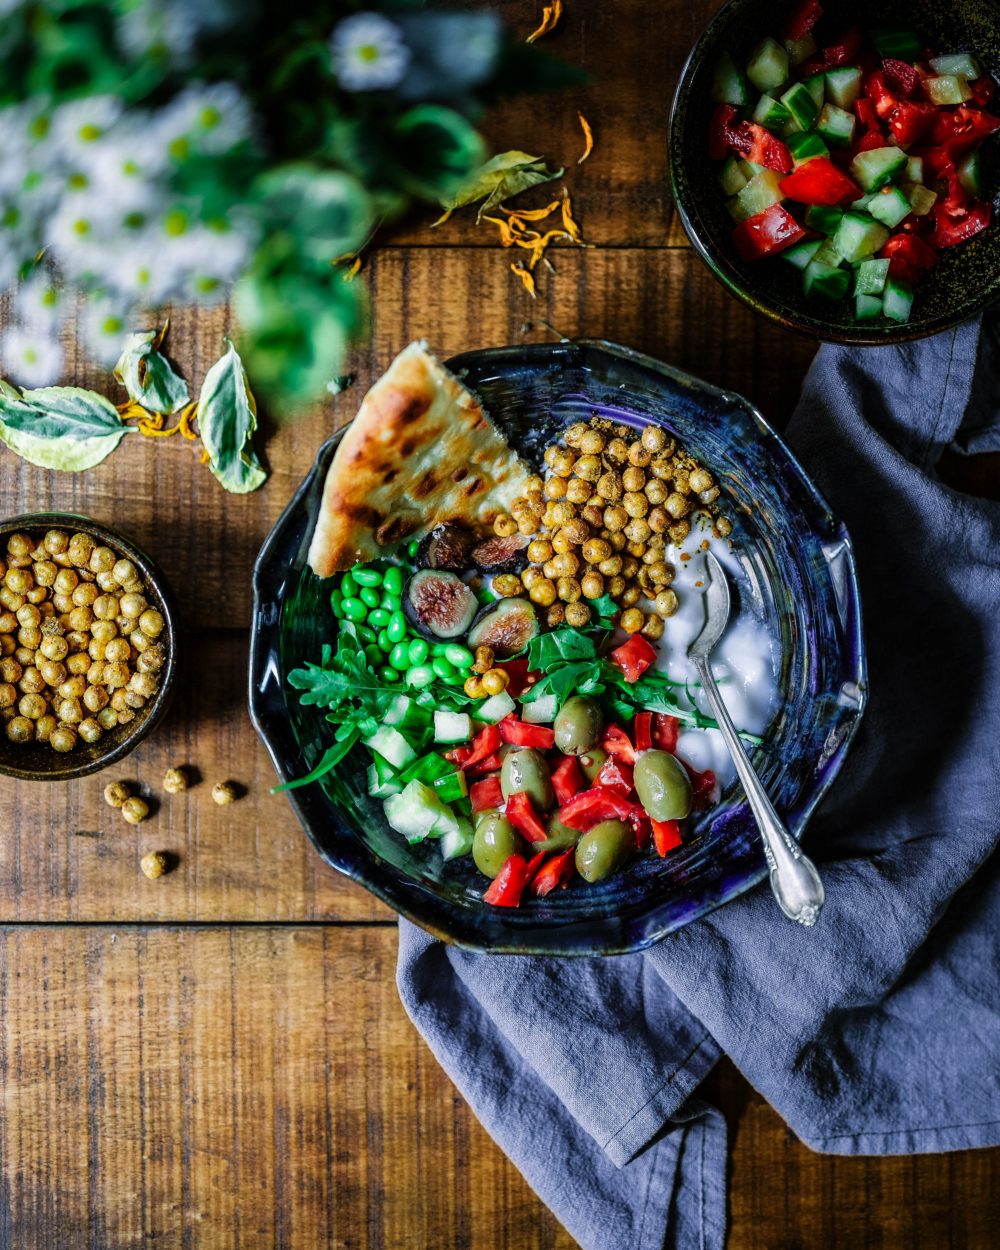 2 New Studies Show Why Vegan Diet Is Even More Life-Sustaining Than We Thought